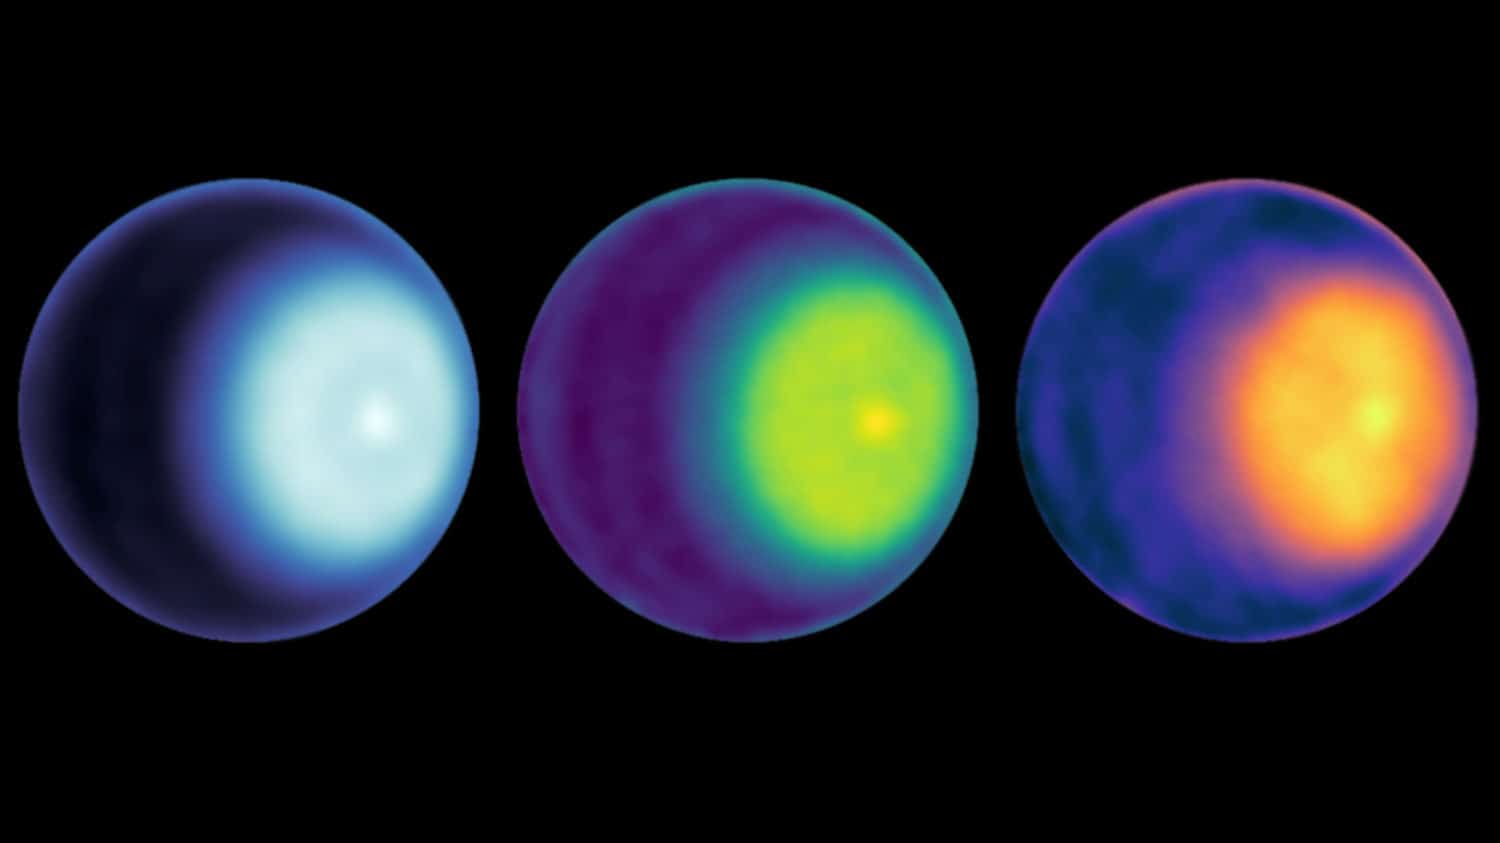 microwave observations to spot the first polar cyclone on Uranus